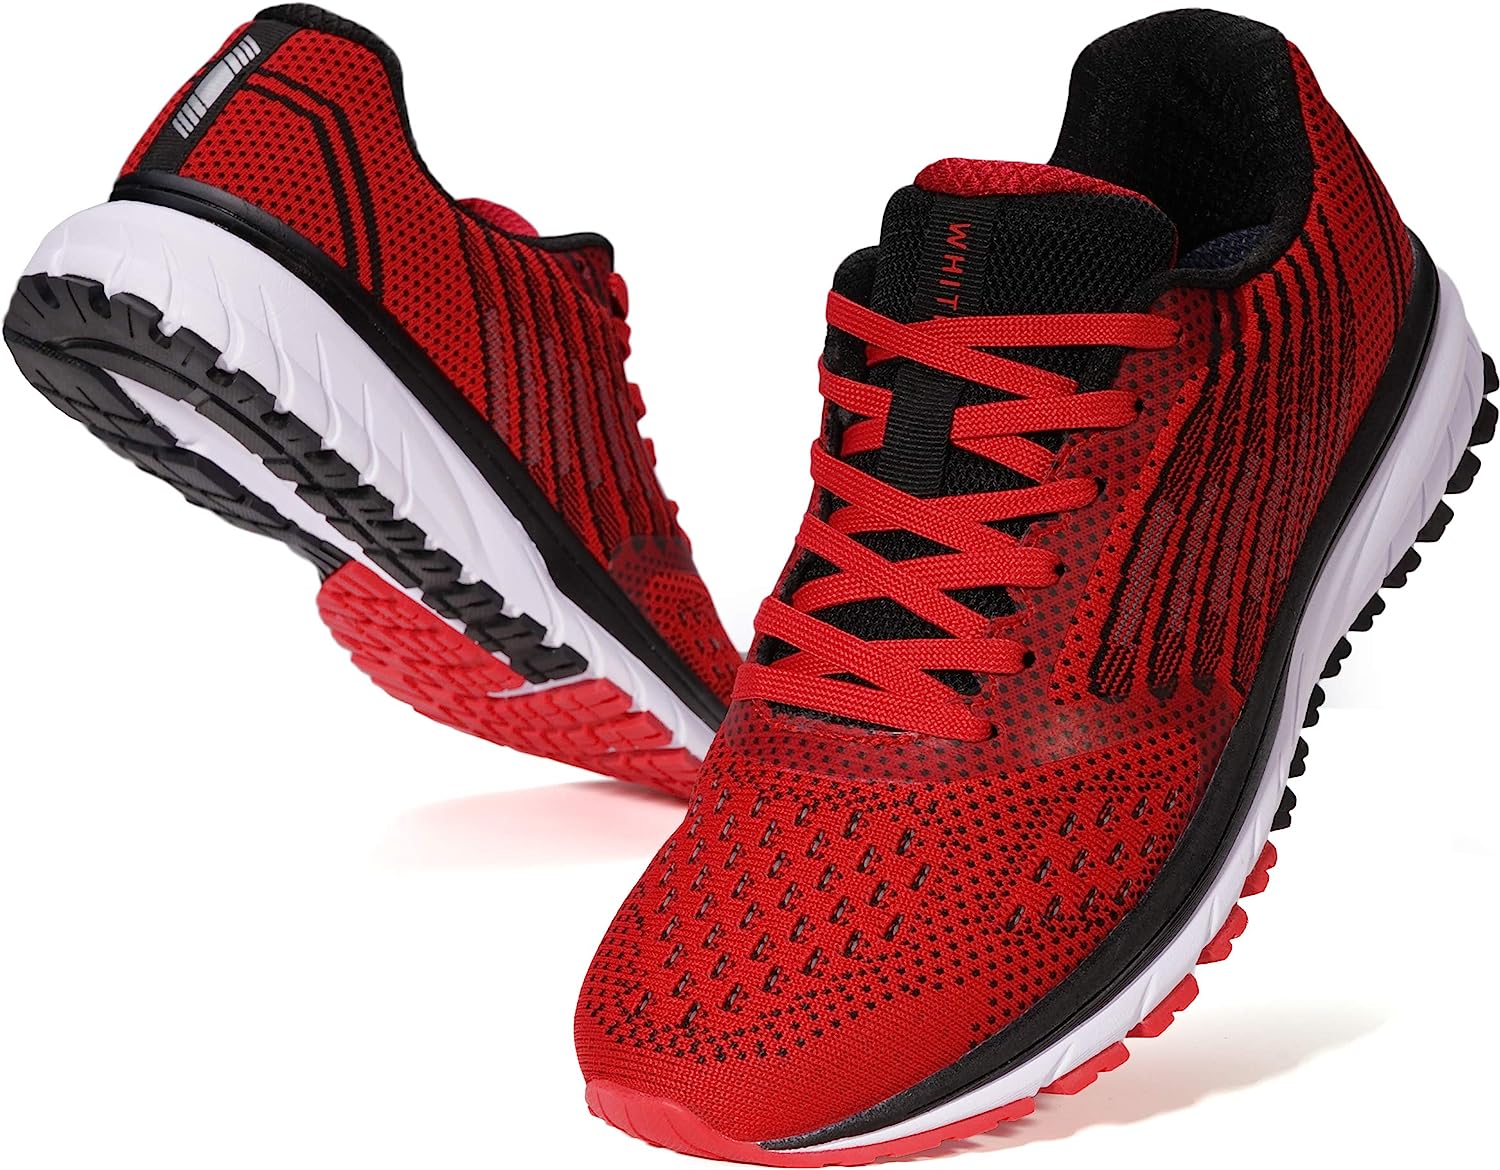 Joomra Whitin Men's Supportive Running Shoes Cushioned [...]